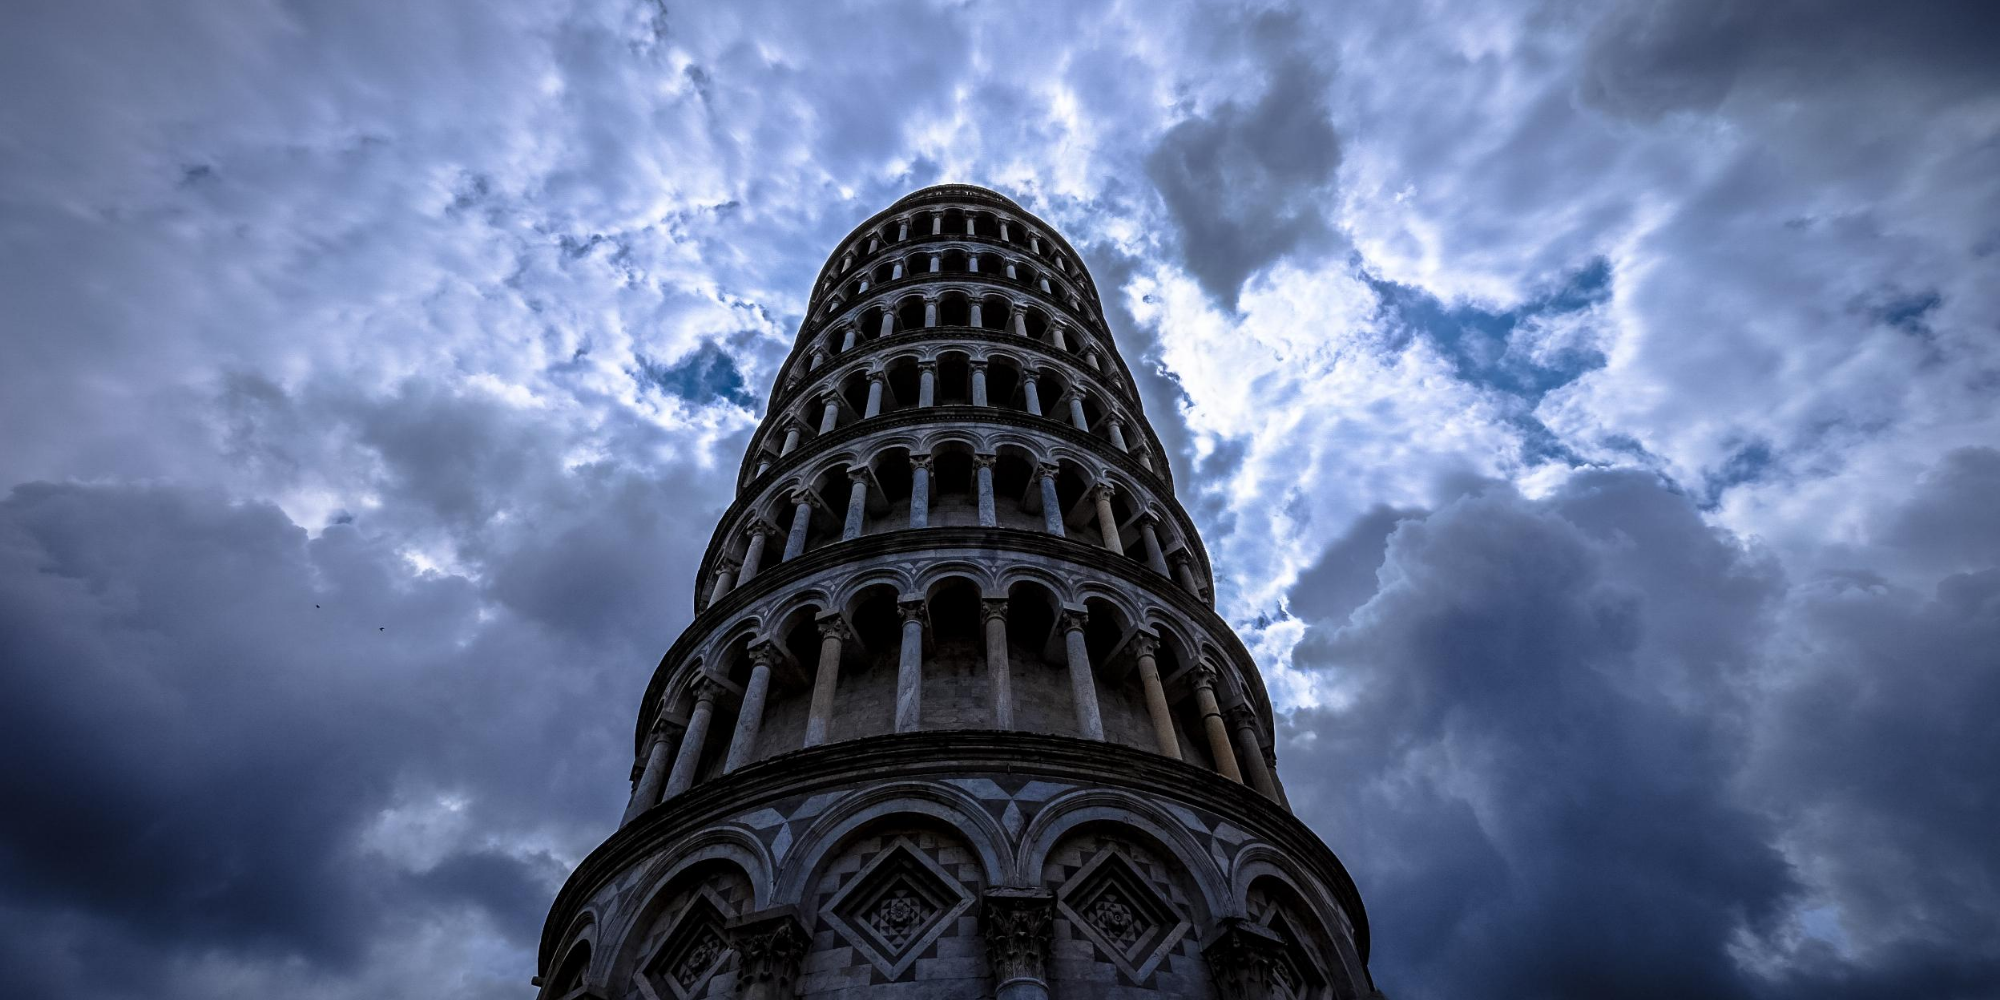 Confusion Abounds: Is This Our Tower of Babel Moment?